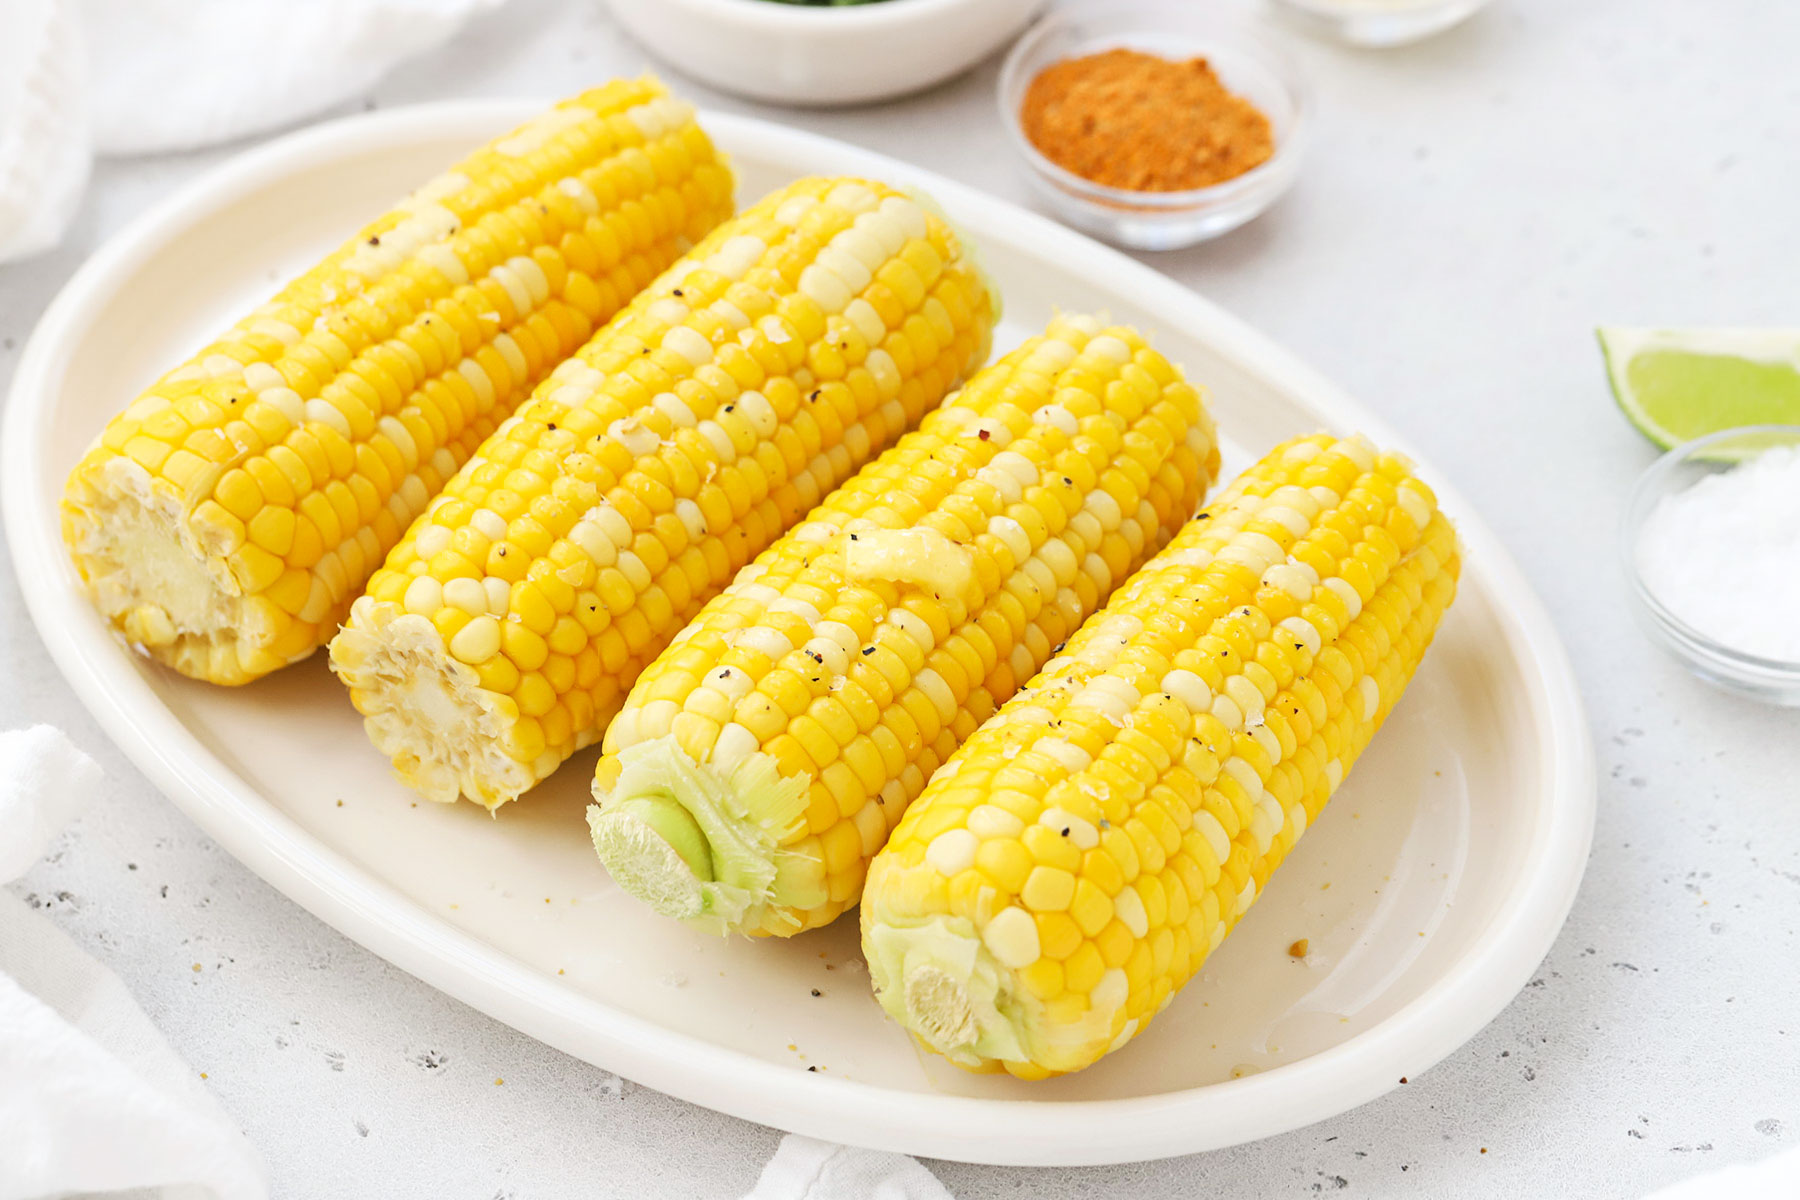 boiled corn on the cob with butter, salt and pepper